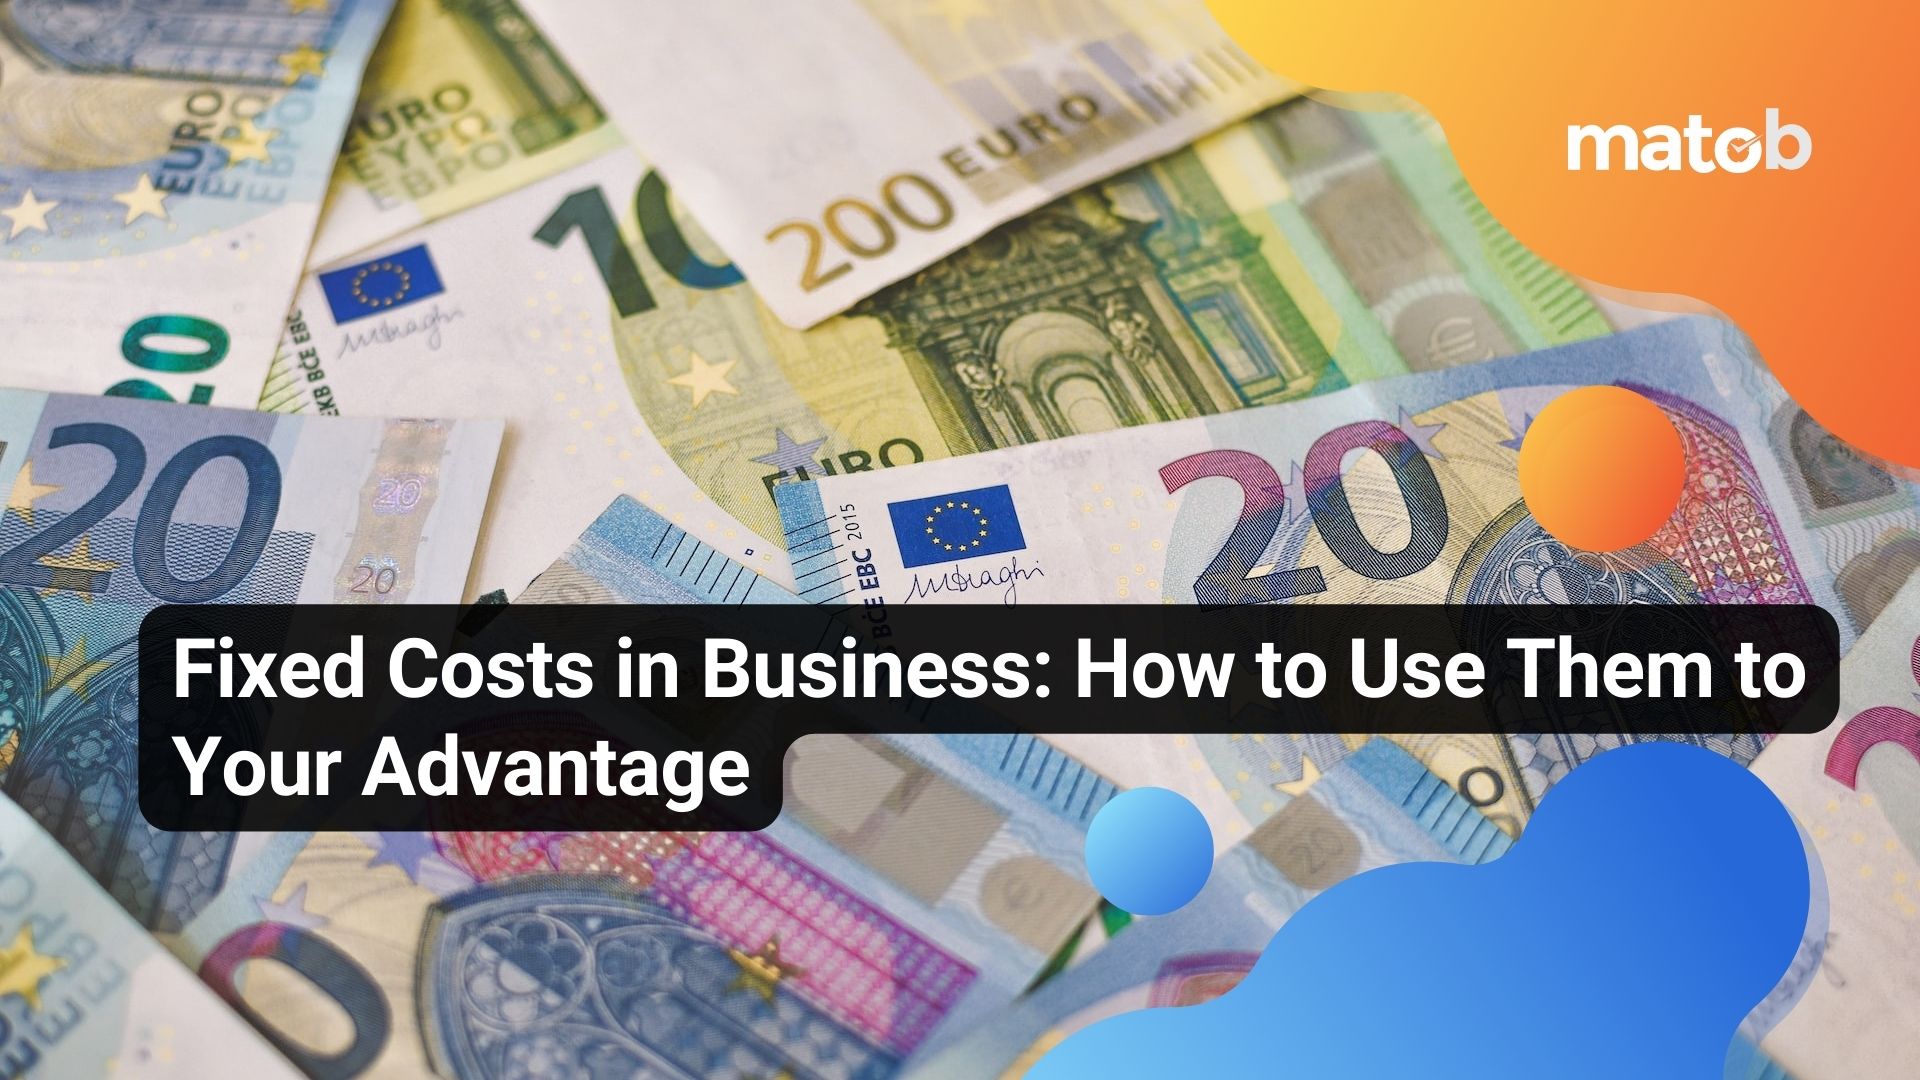 Fixed Costs in Business: How to Use Them to Your Advantage